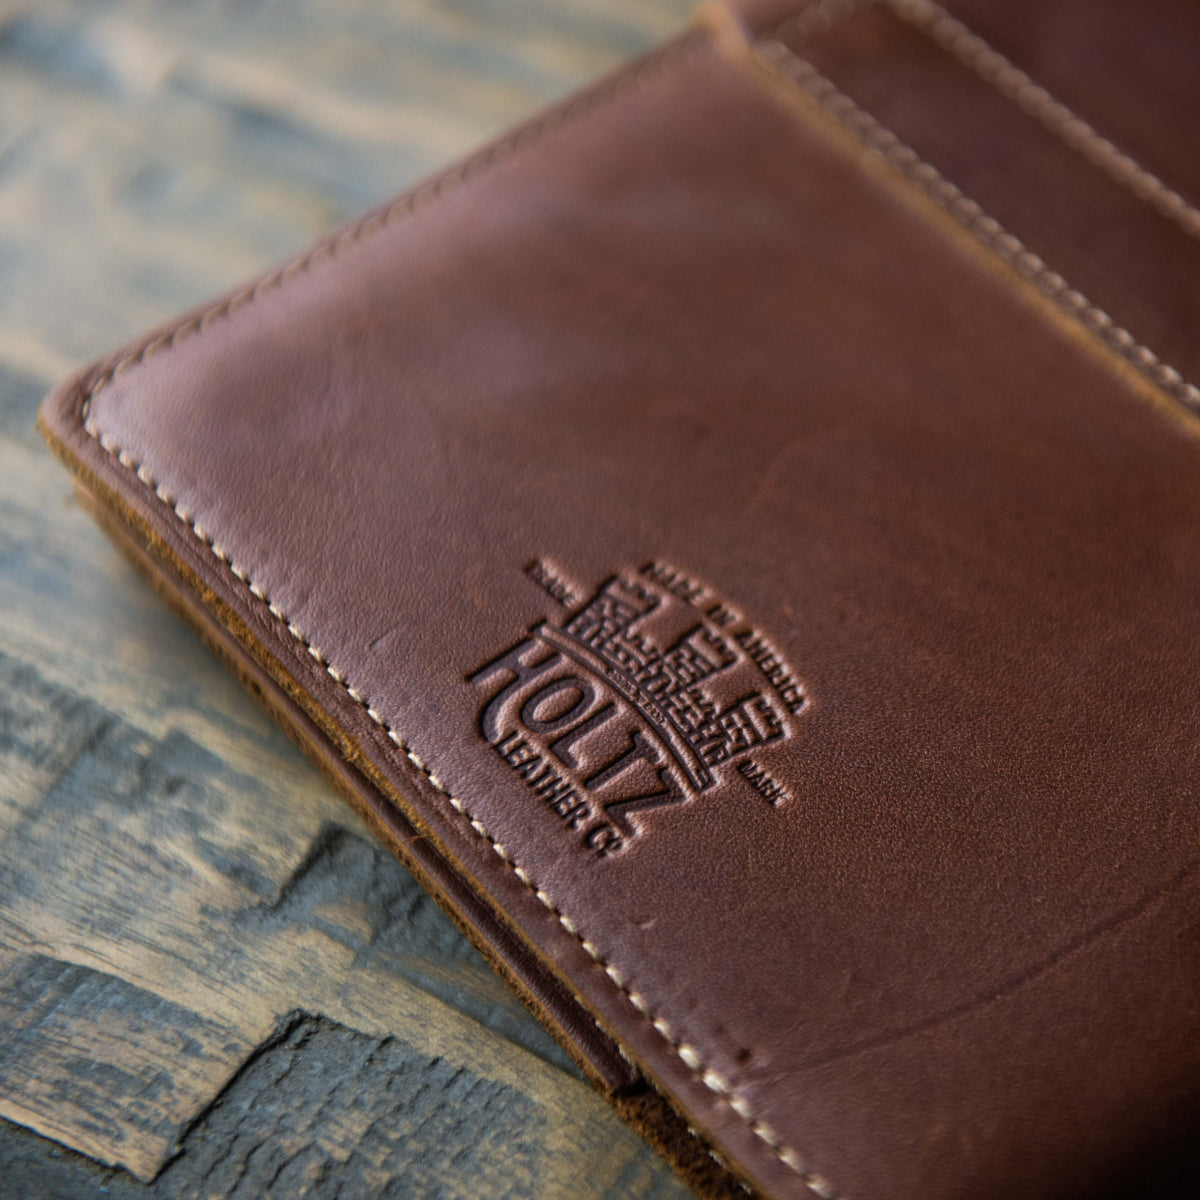 The Texas Inventor Personalized Fine Leather A5 Moleskine Journal Diary with Texas Logo